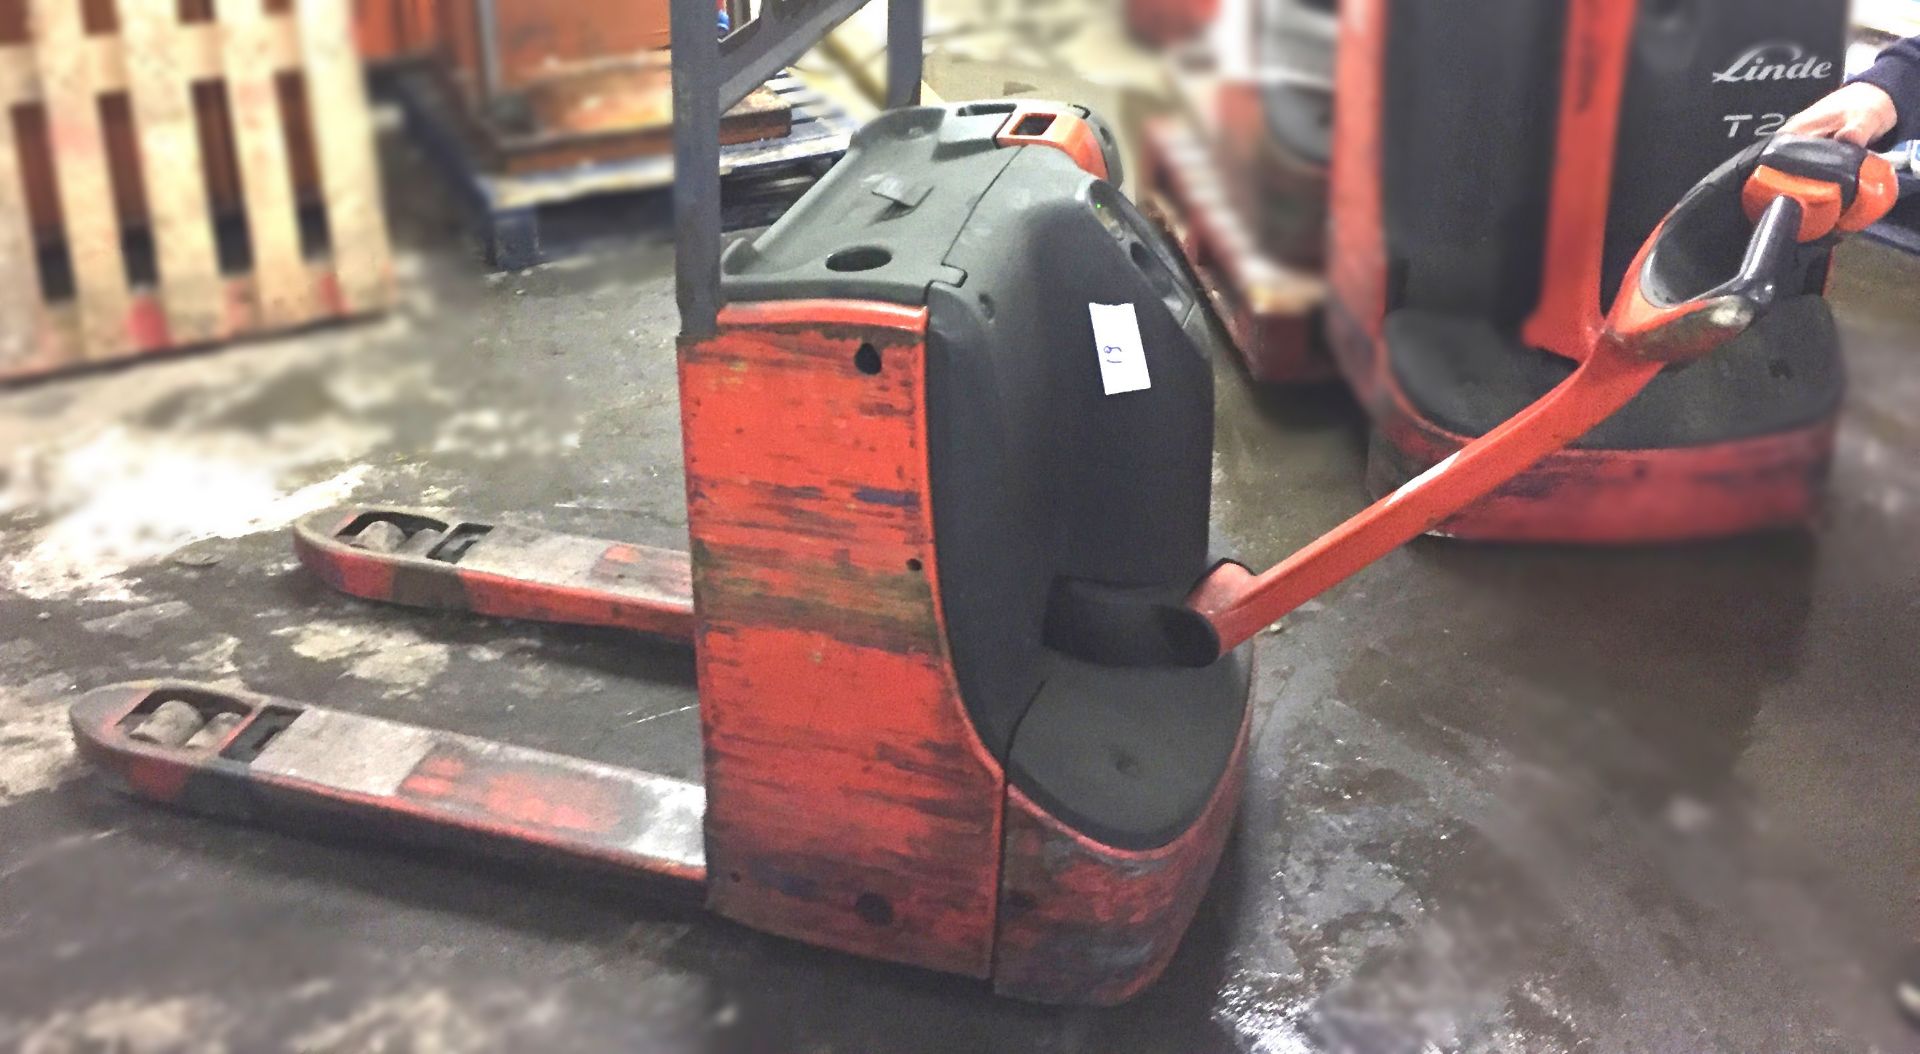 1 x Linde T20 Electric Pallet Truck - Tested and Working - Includes Key and Charger - CL007 - Ref: